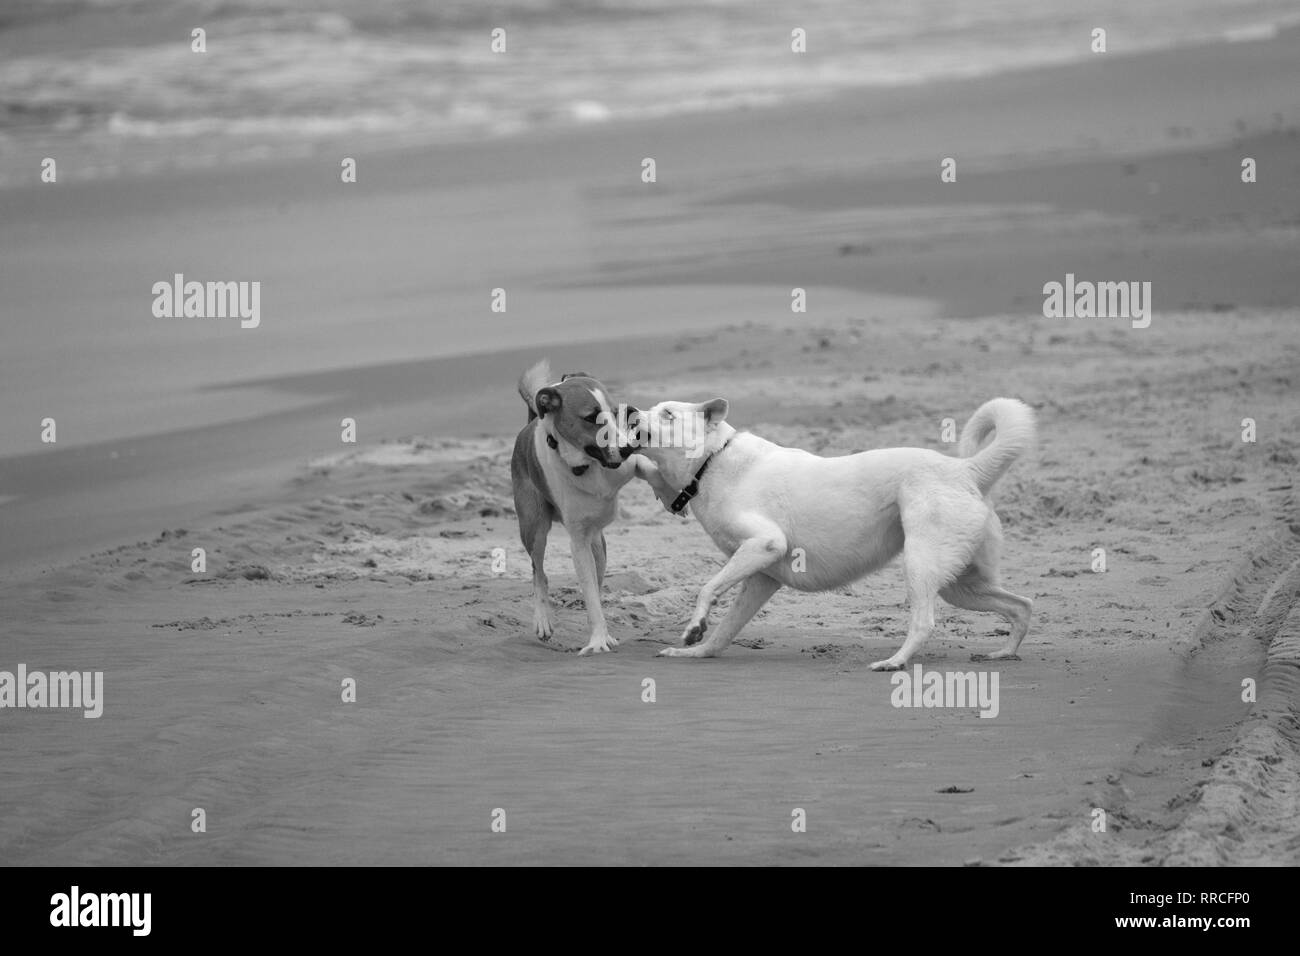 2 playful dogs playing and fighting on a beach in black and white Stock Photo